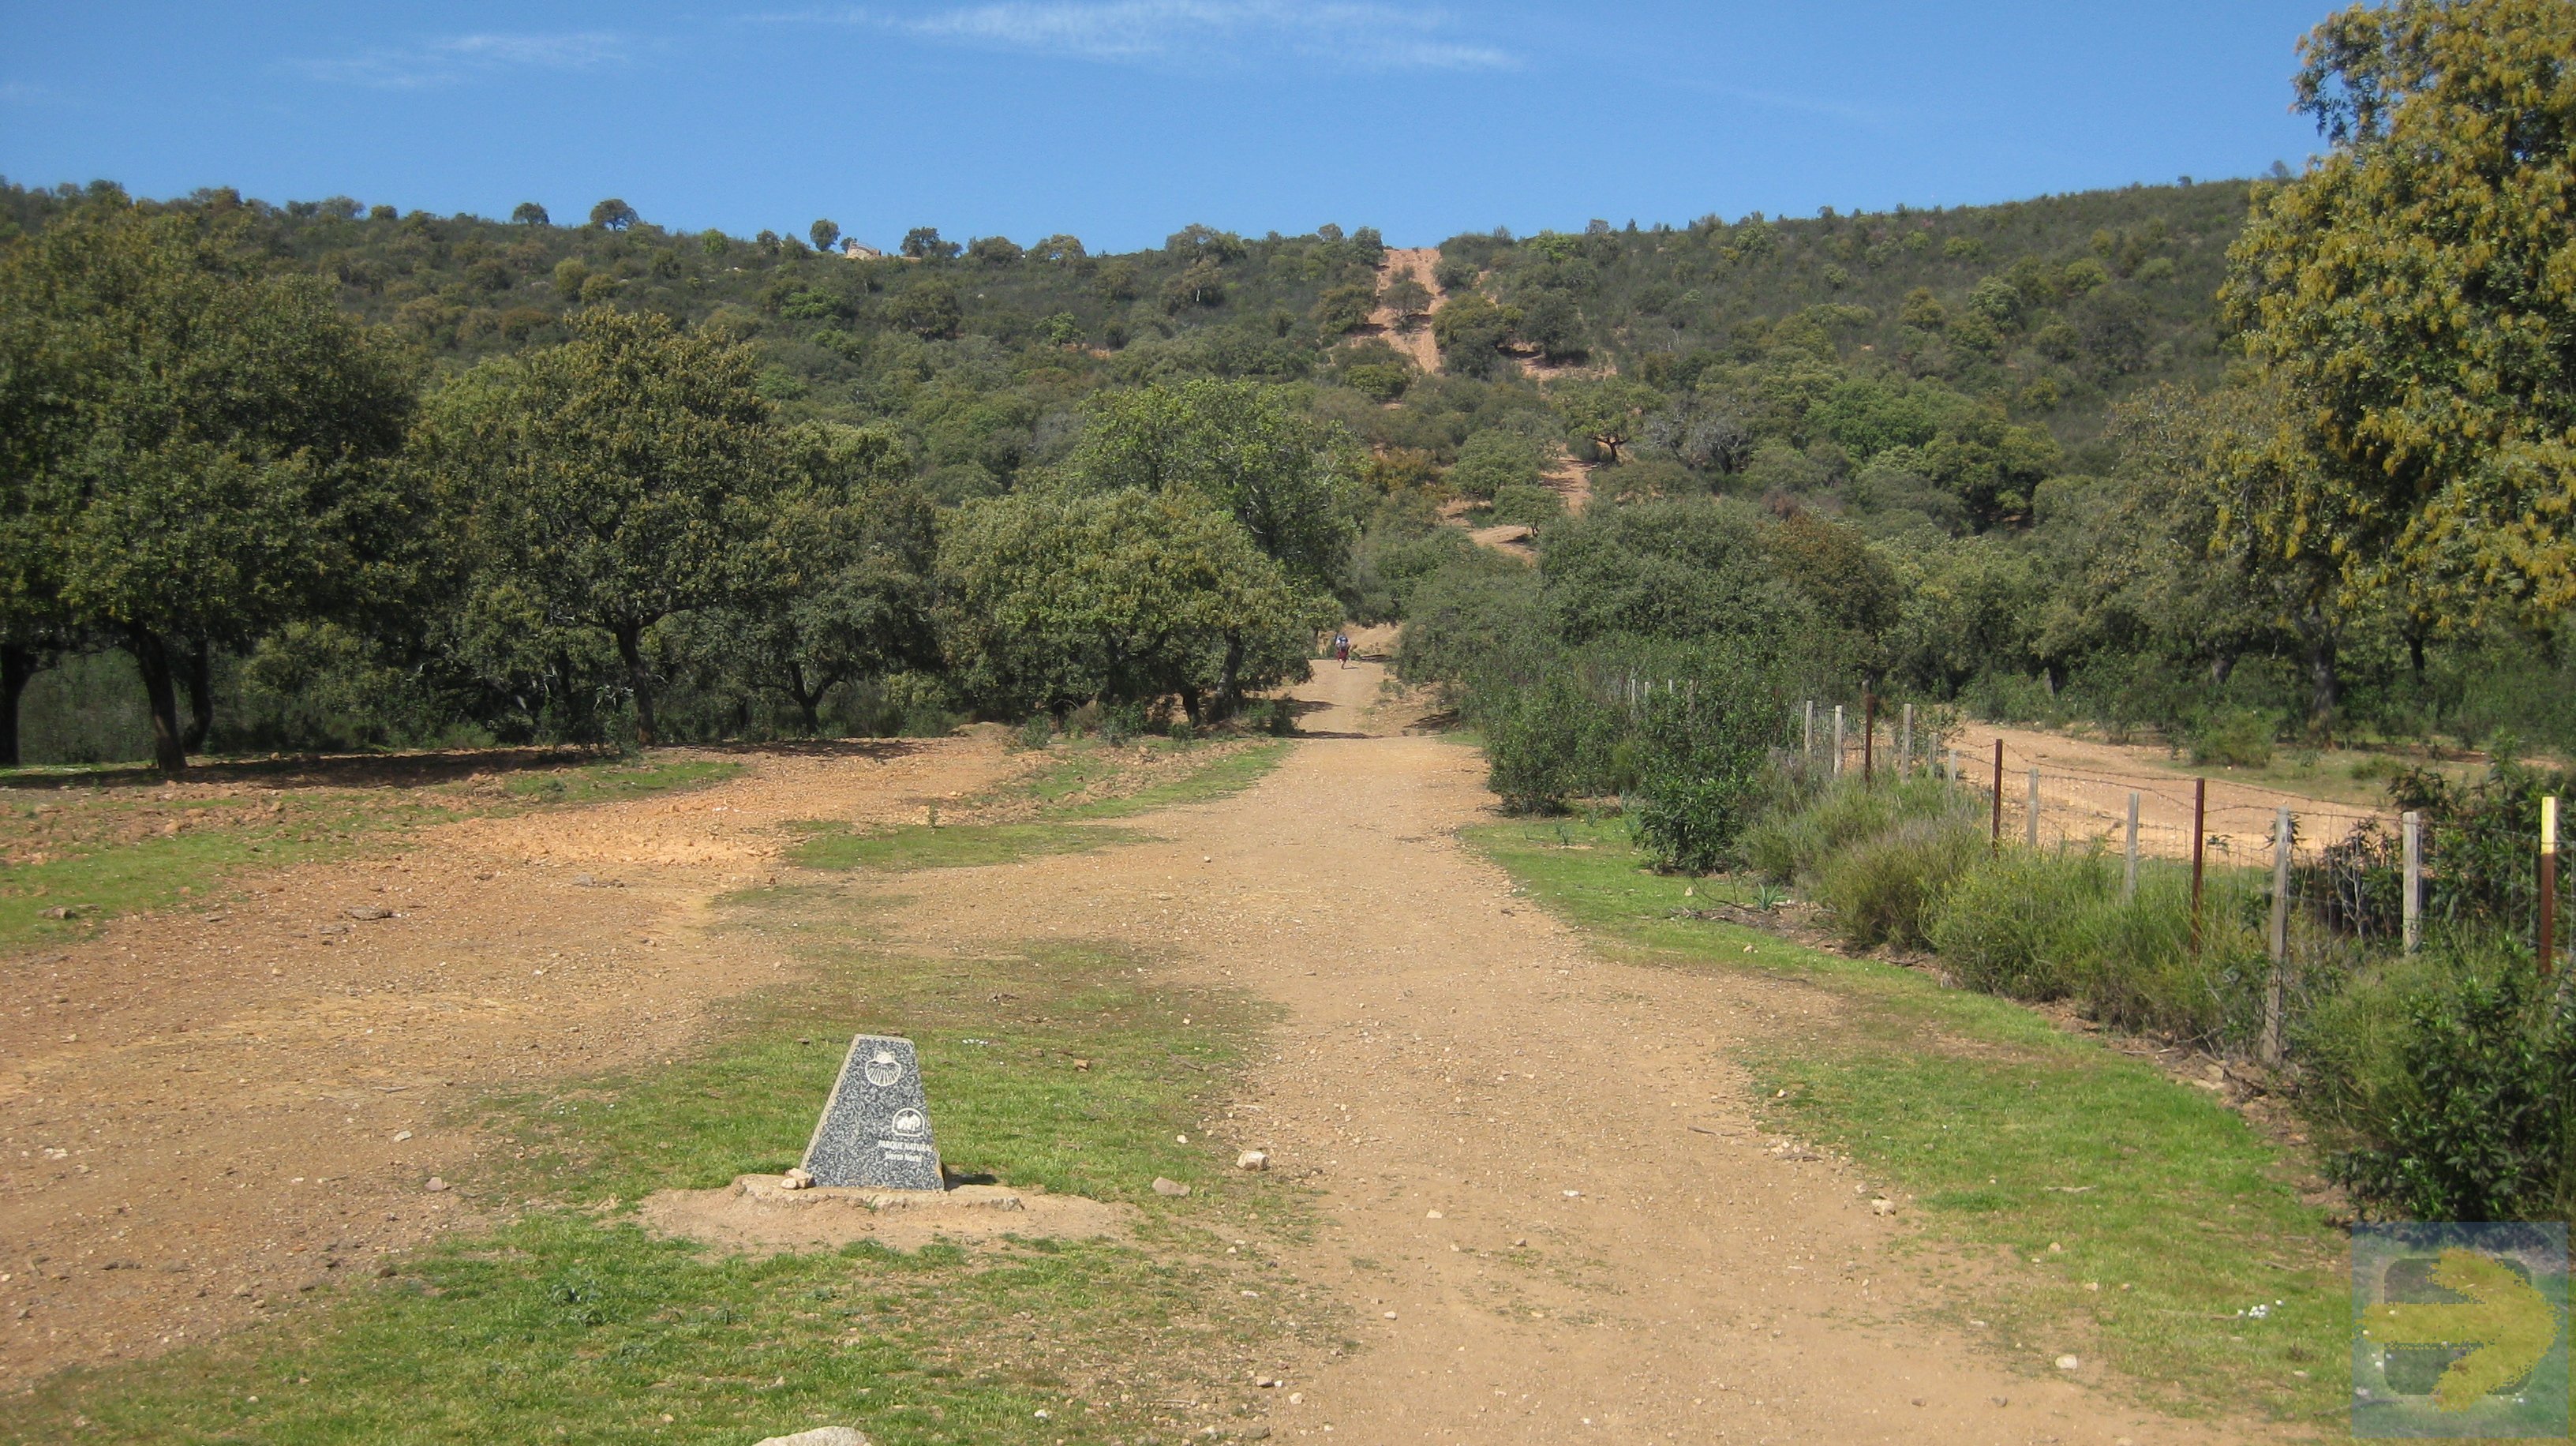 A challenging hill just before Almaden. 21 Feb 2020